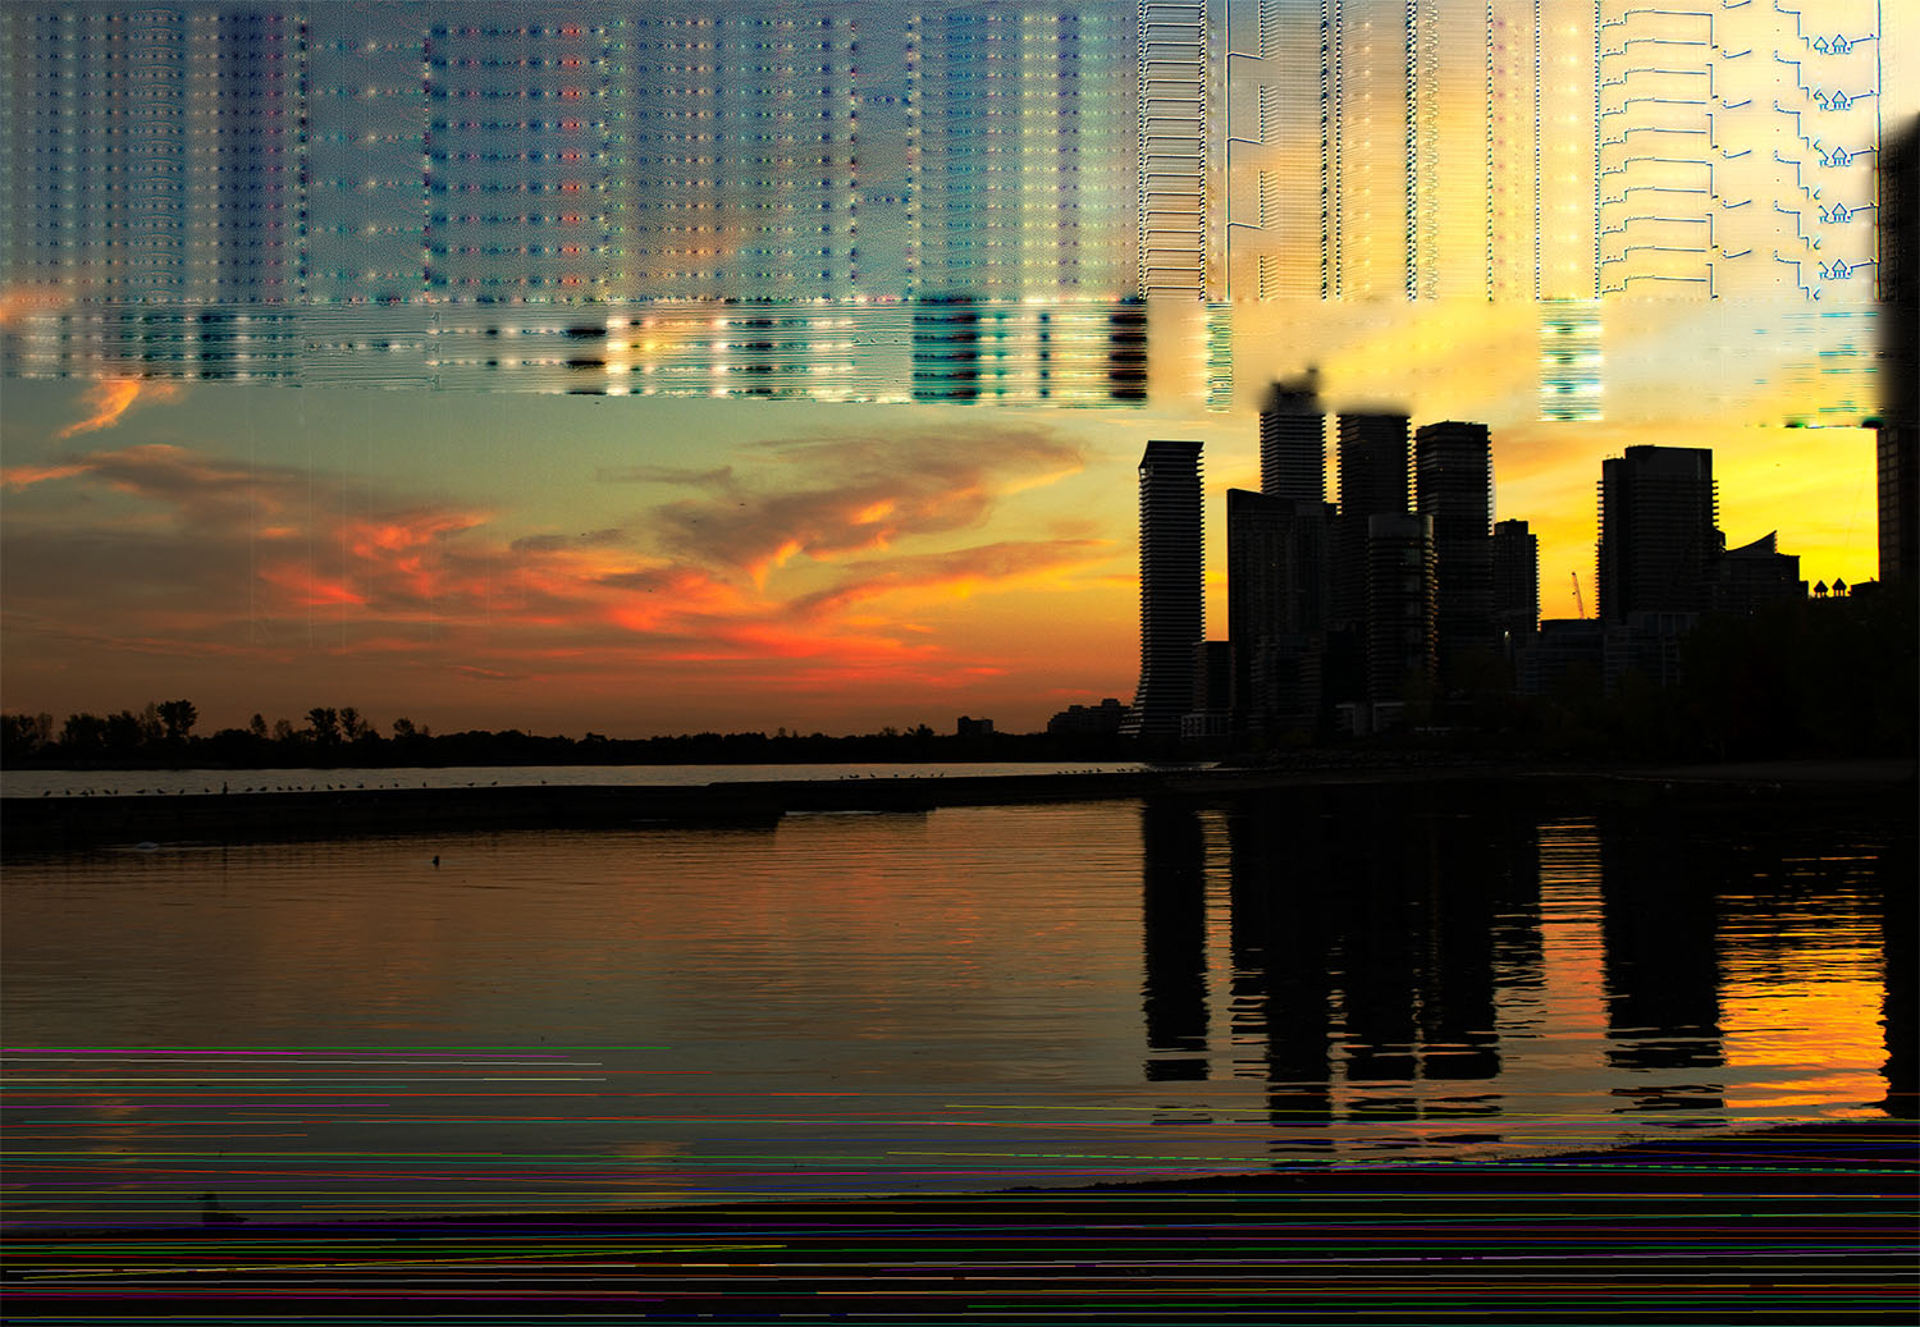 This photo consists of a skyline view of a city during sunset but is distorted by a digital glitch effect over top. The sky is a warm blue, orange, and yellow and the glitch is multicolored.